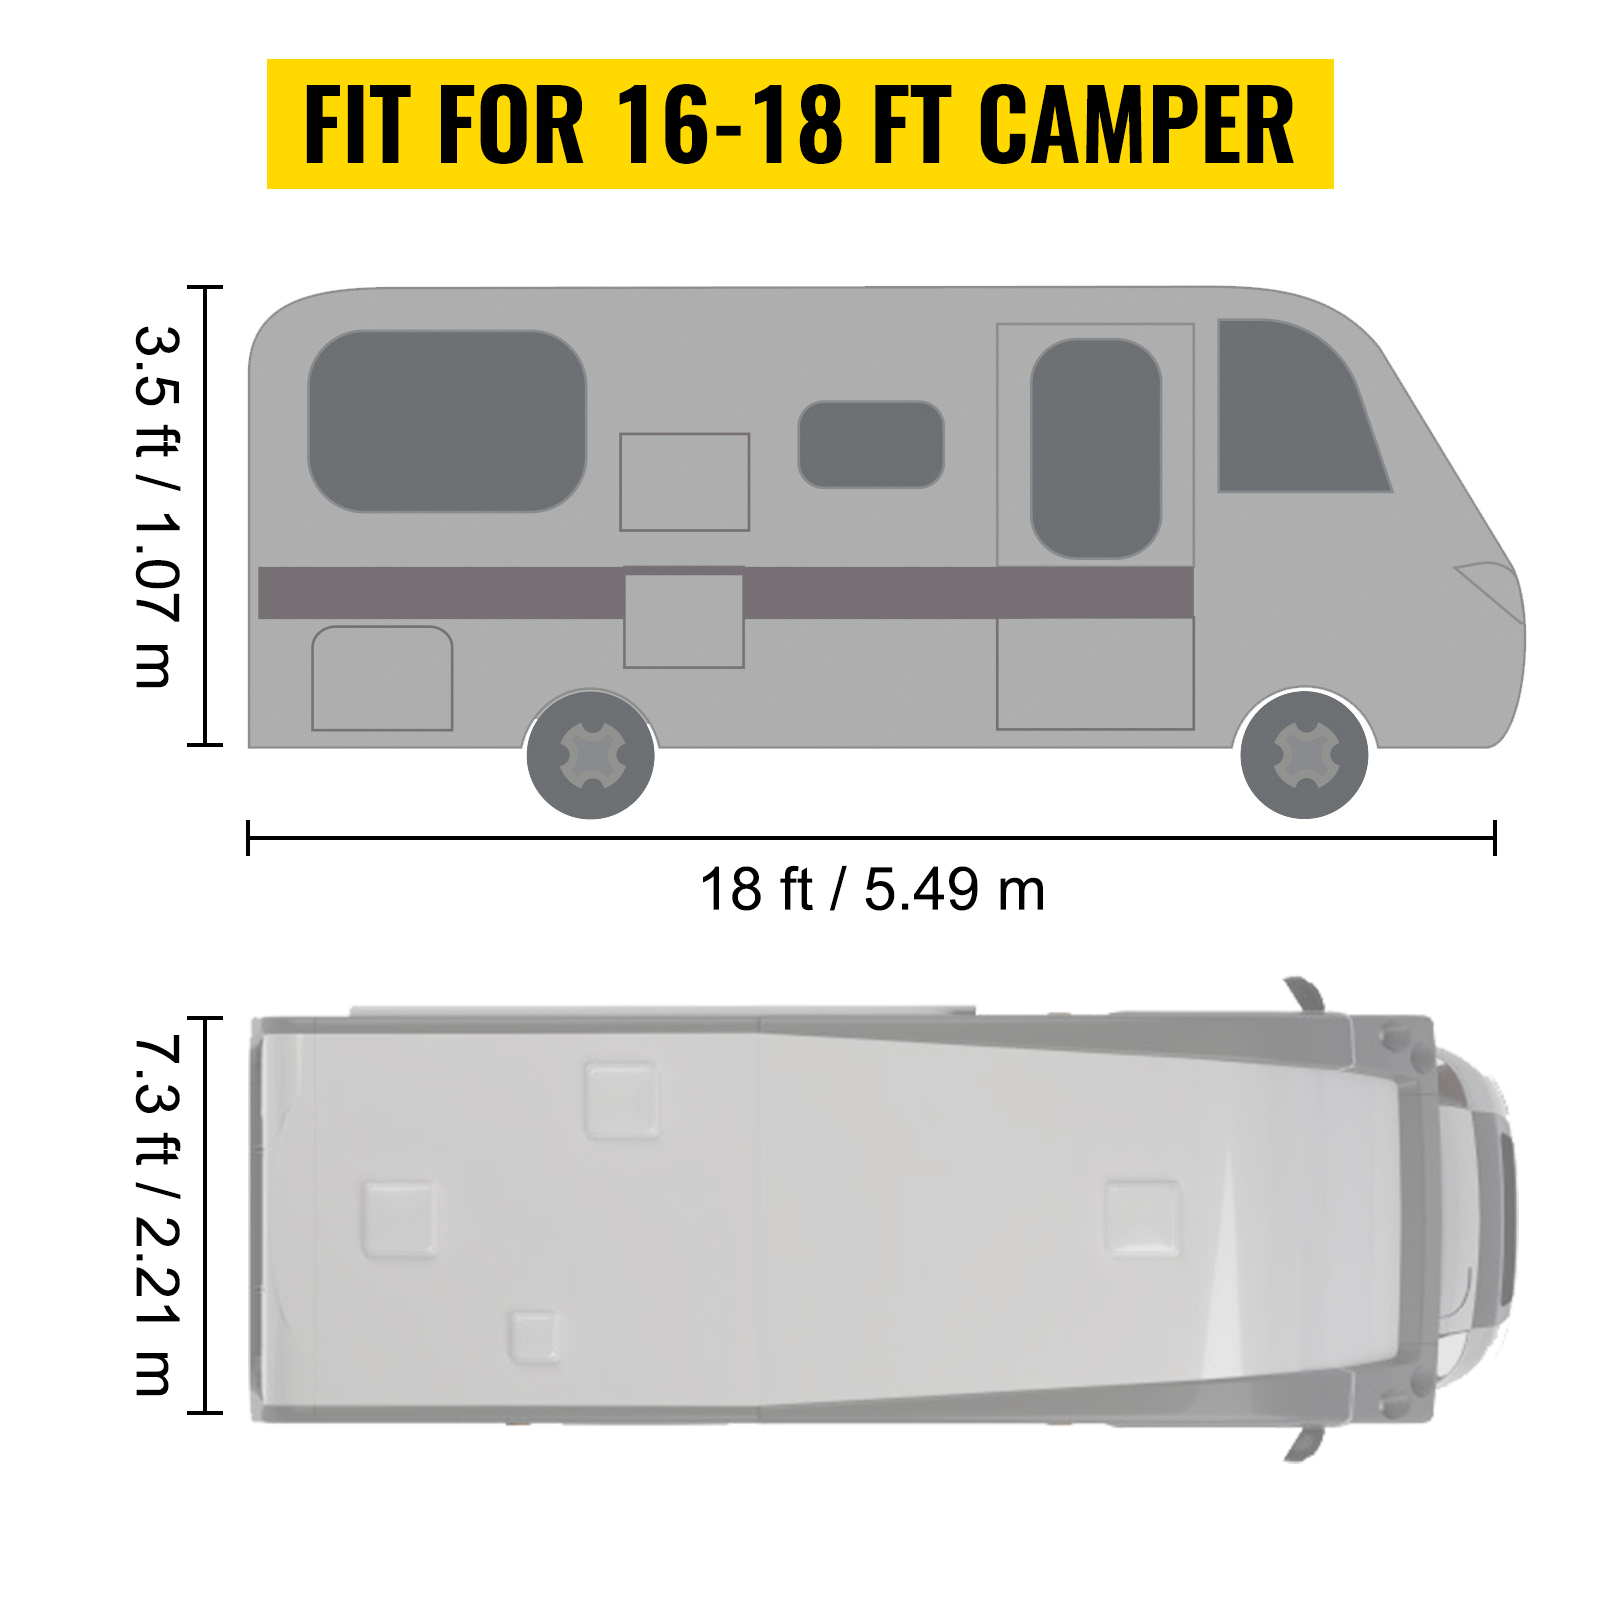 VEVOR 24 ft. to 27 ft. RV Cover RV and Trailer Cover Waterproof Breathable  Anti-UV Ripstop 4-Layer Travel Trailer Camper Cover CY24-273C00000001V0 -  The Home Depot